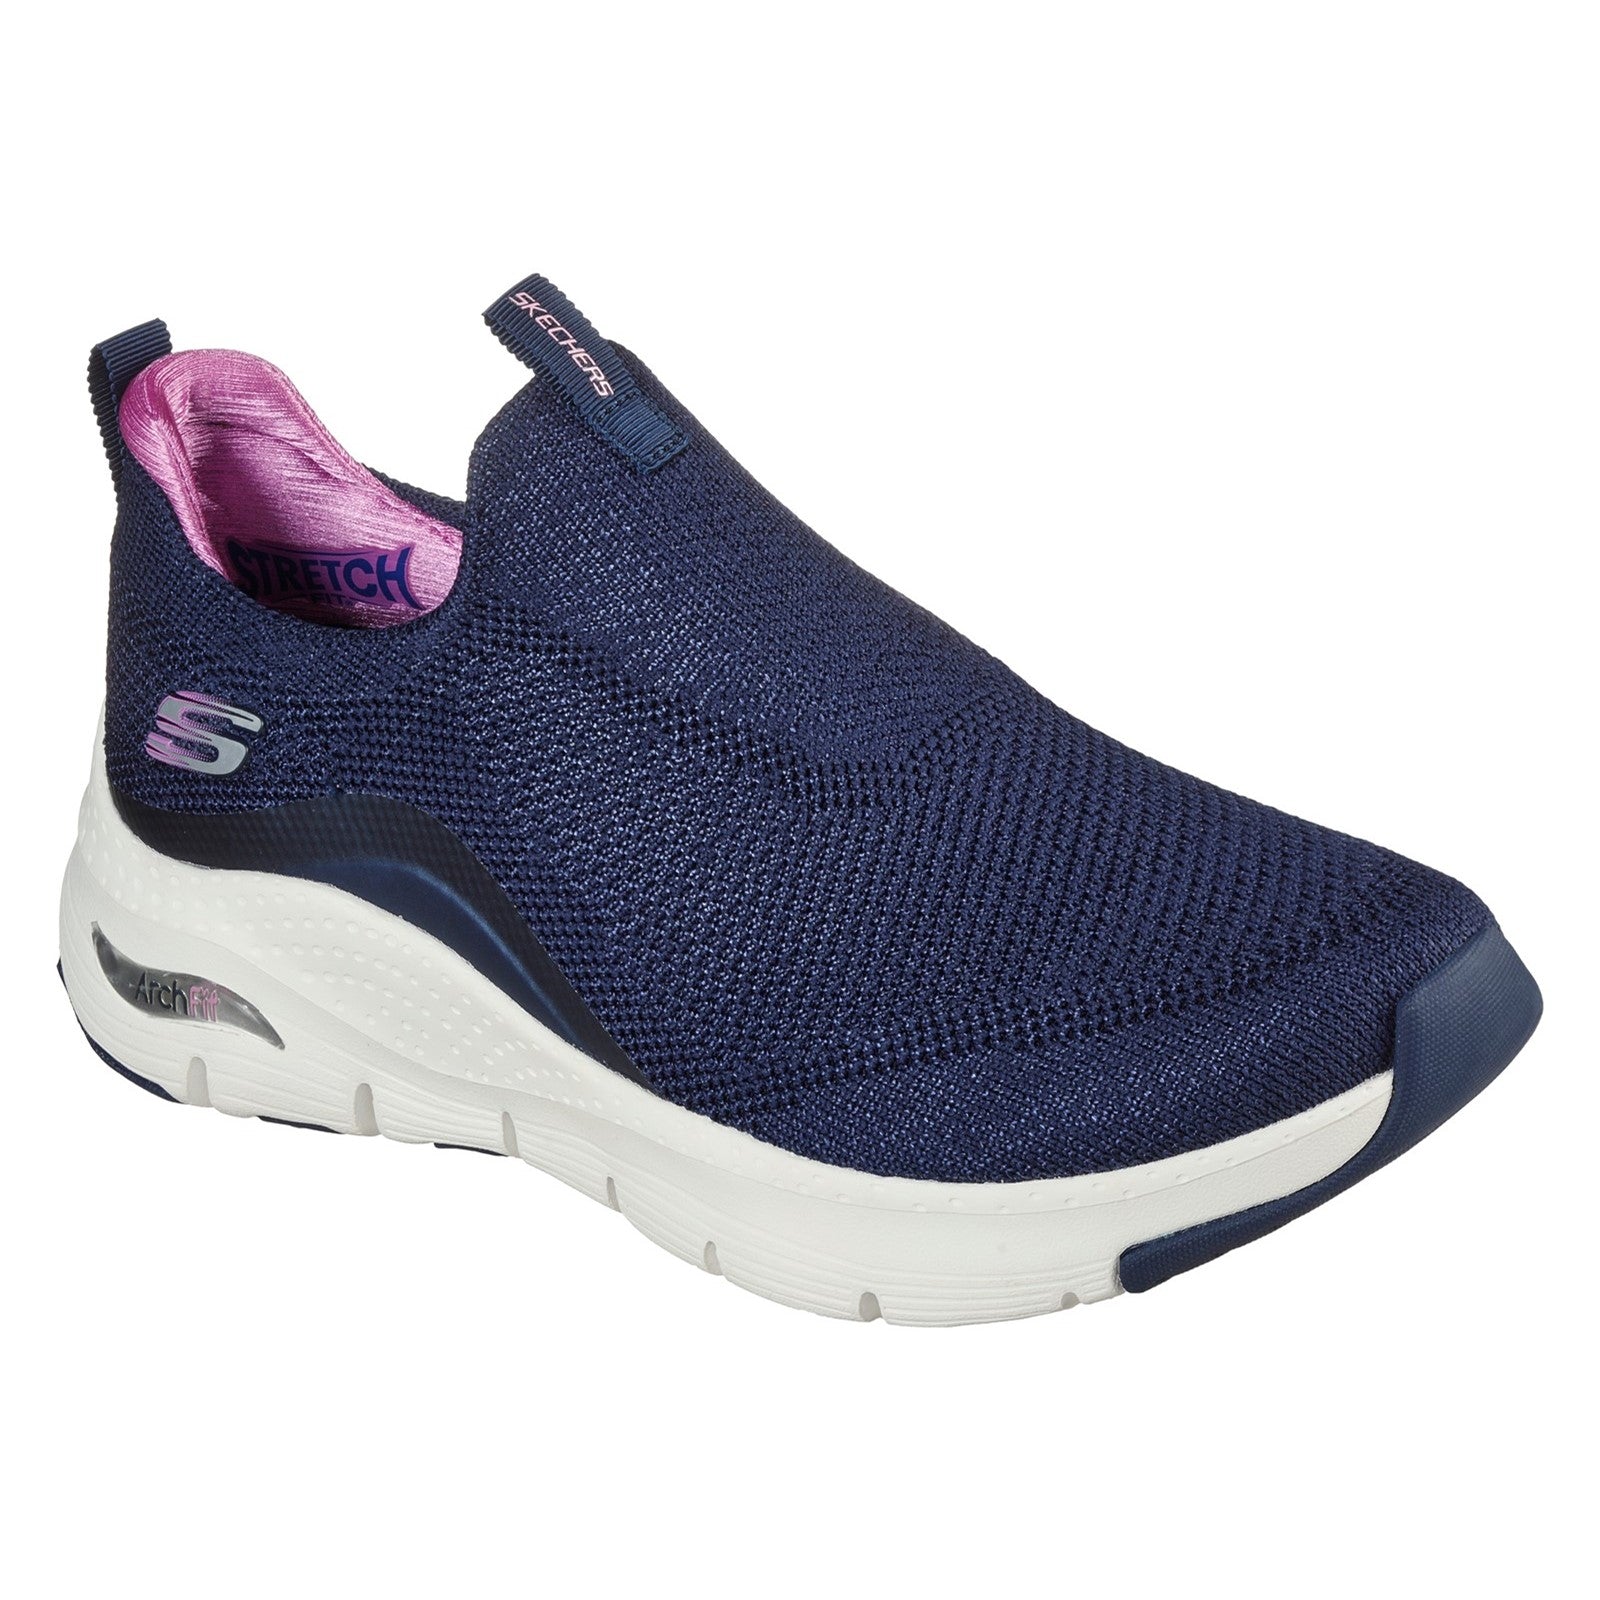 Skechers Arch Fit Keep It Up Sport Shoes